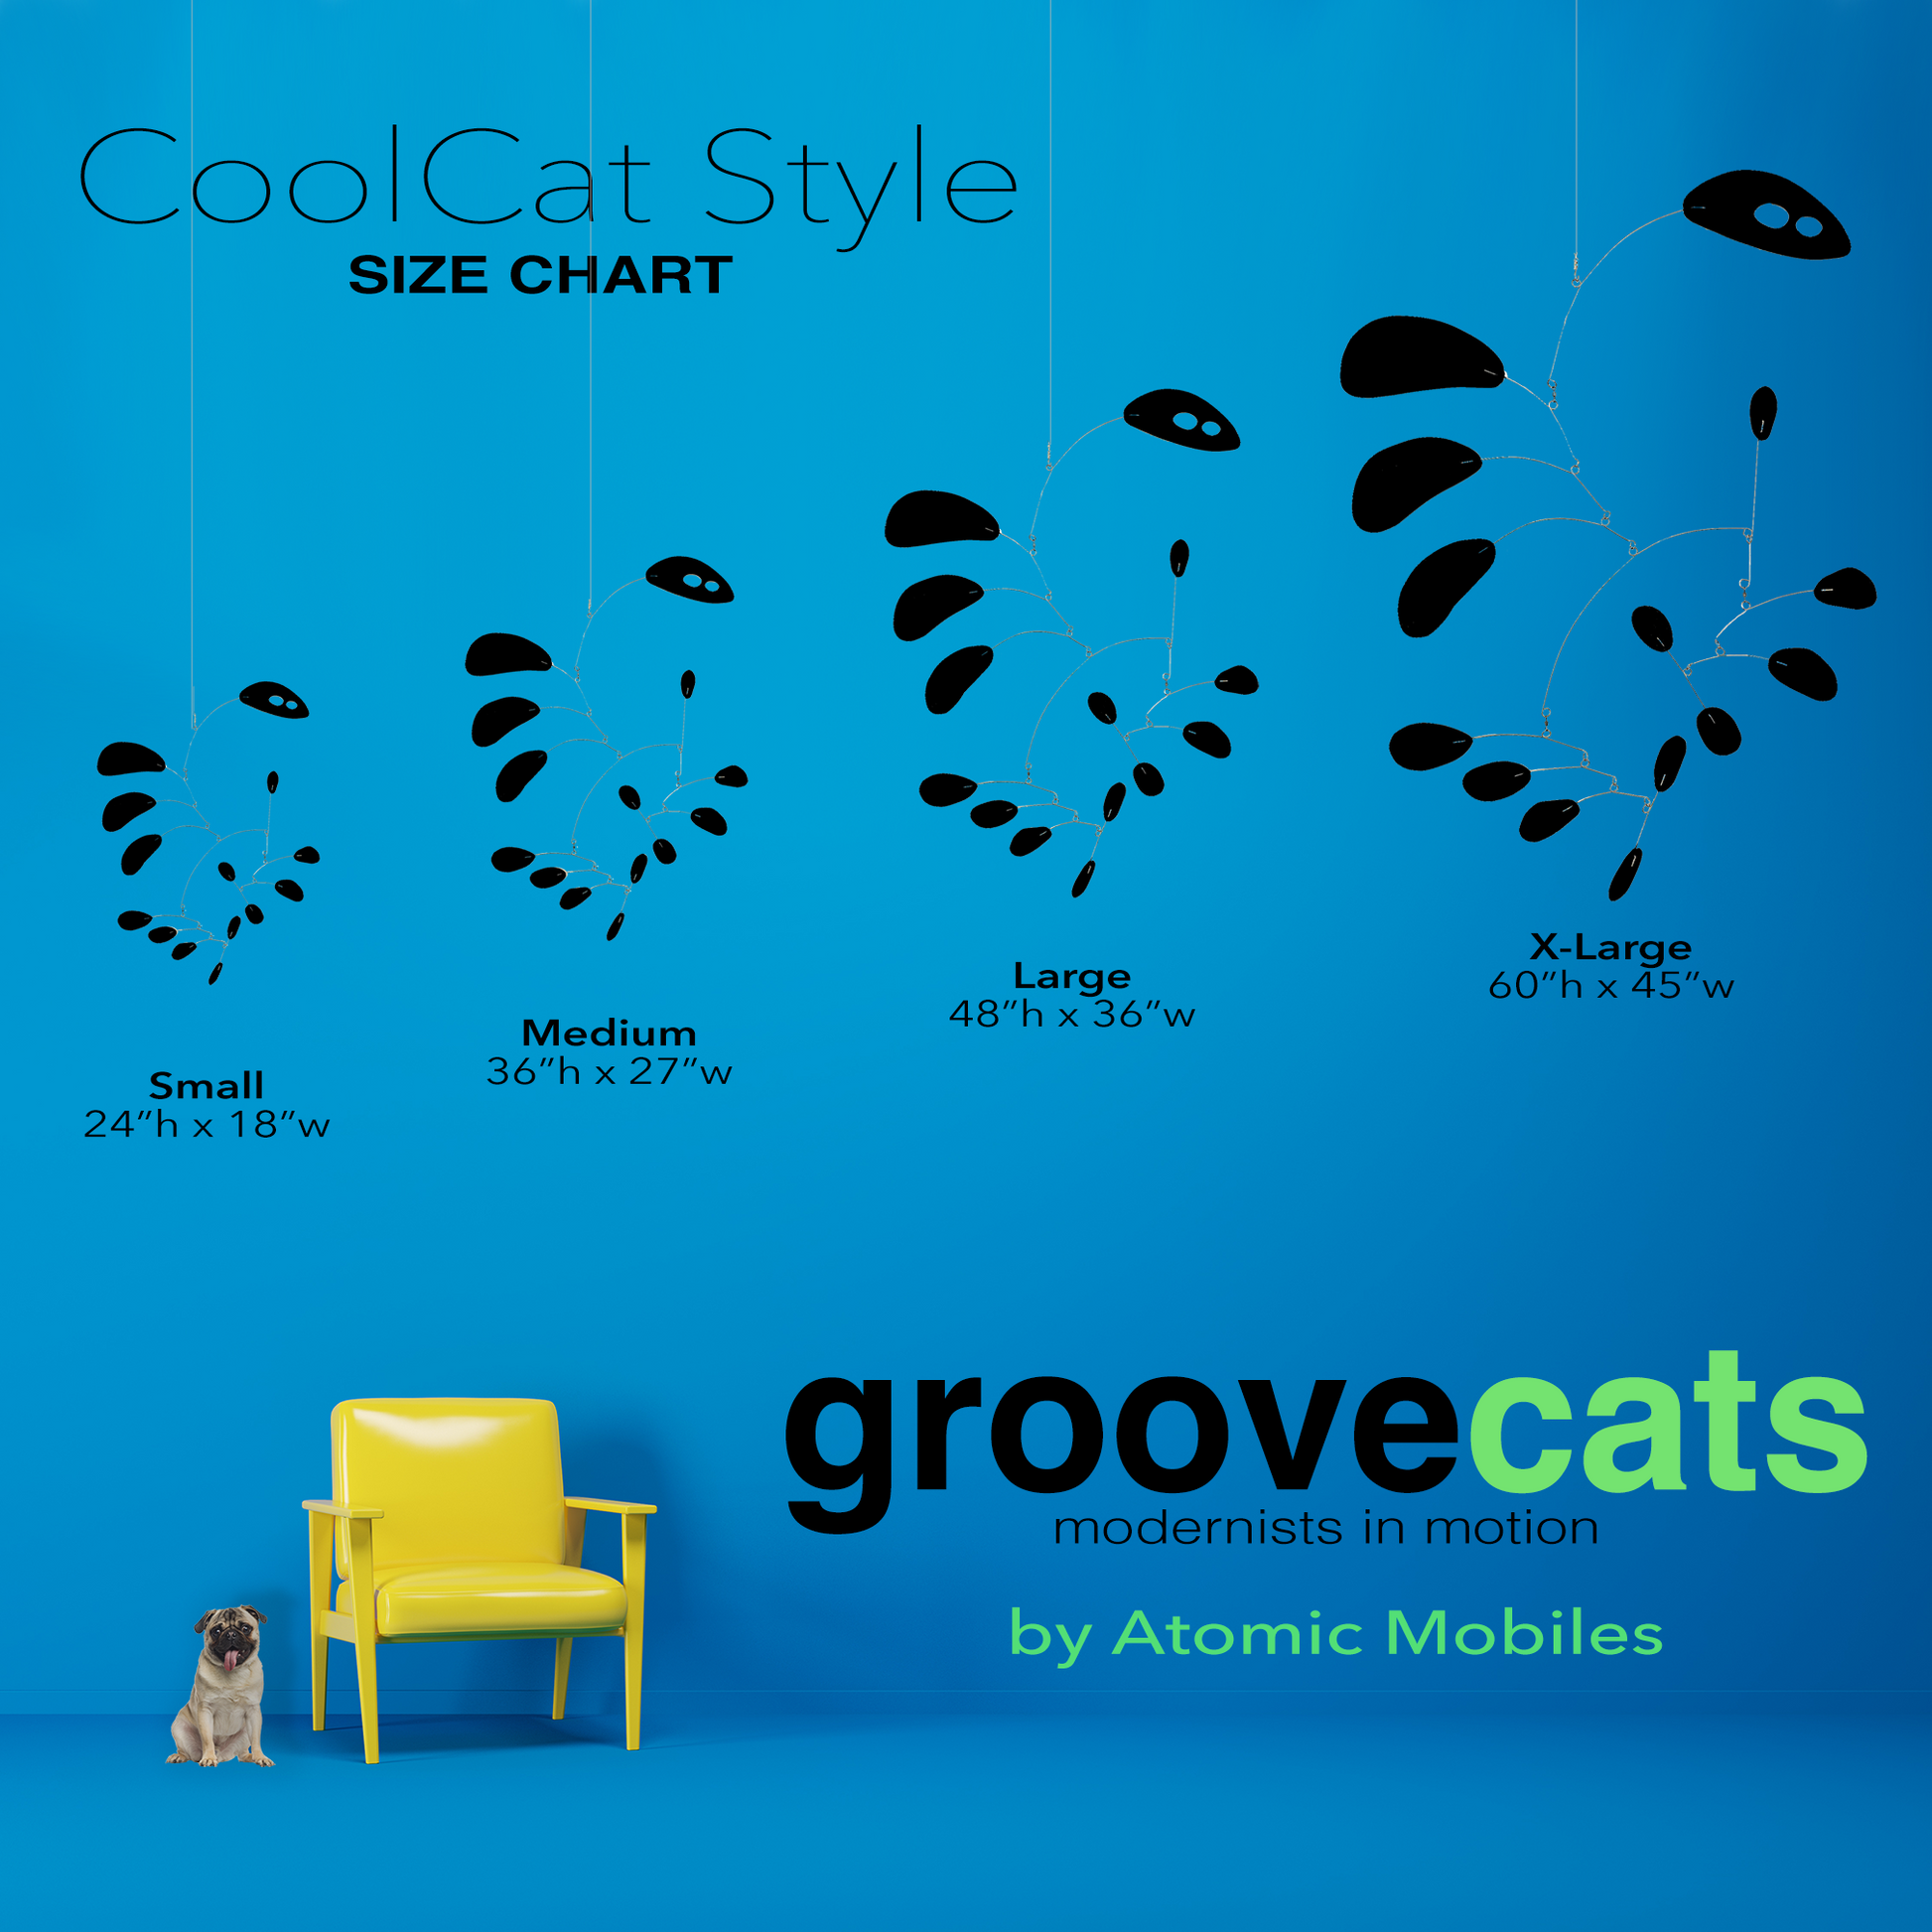 Size Chart for GrooveCats hanging art mobile in COOLCat Style with yellow chair and cute pug dog- handmade mid century modern kinetic art by AtomicMobiles.com